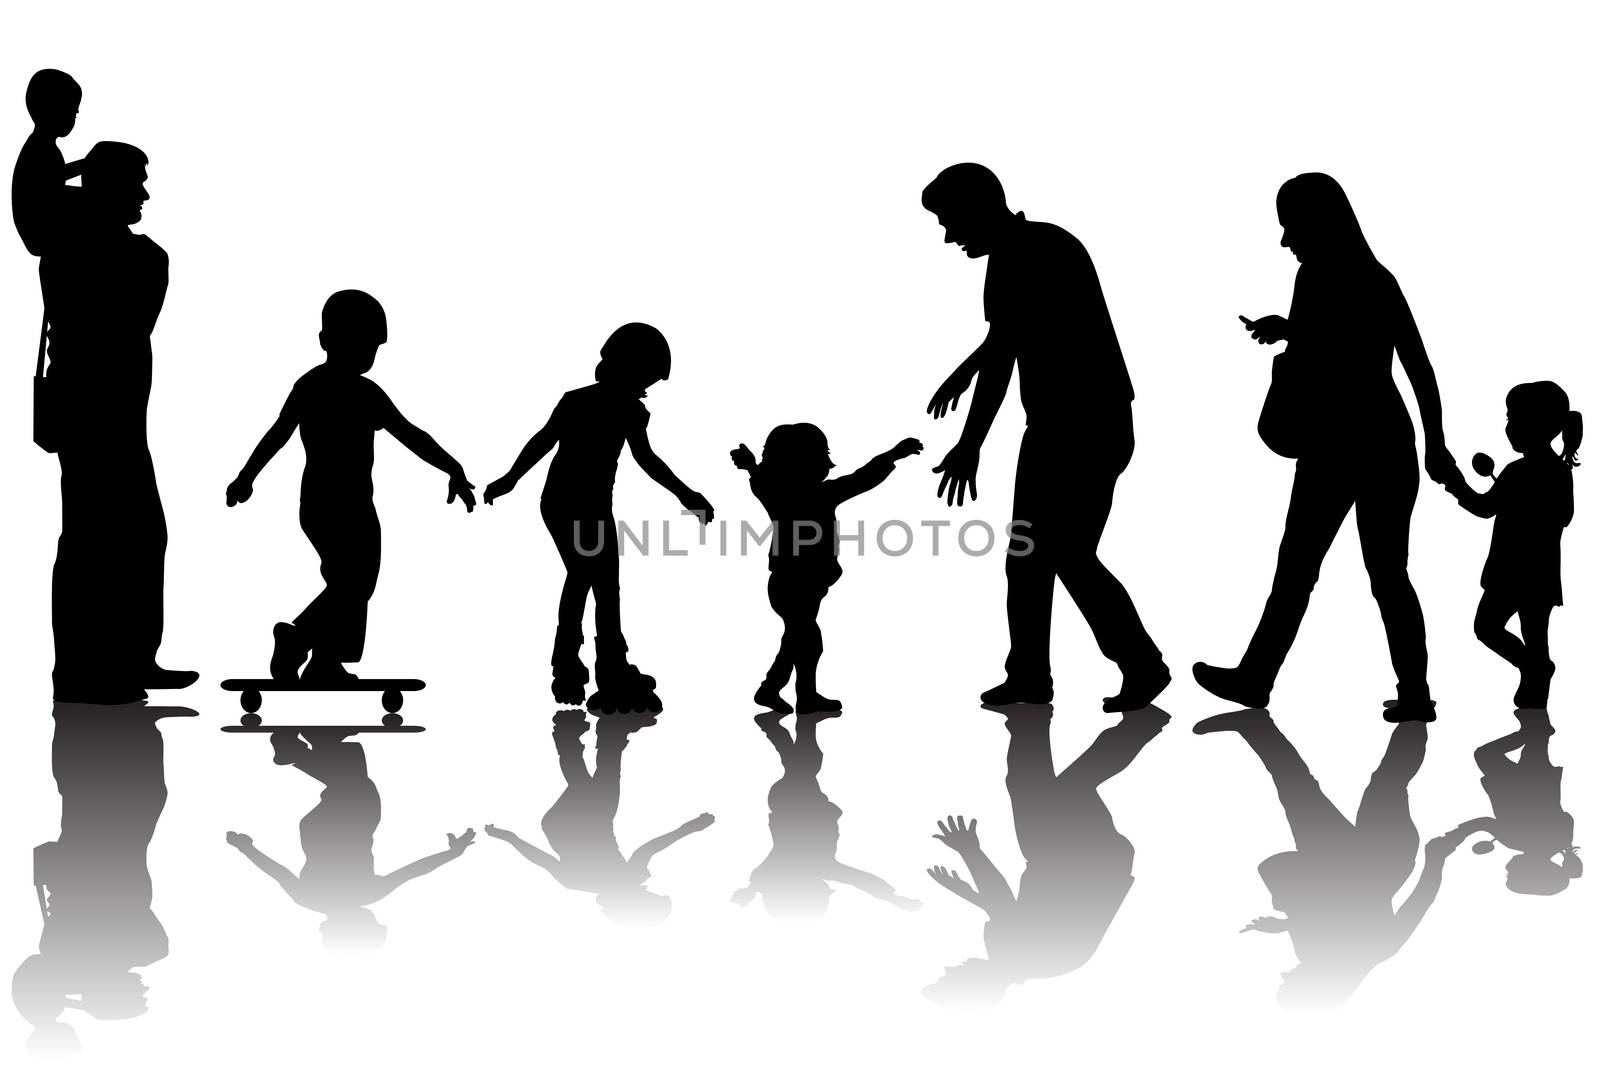 Silhouettes of parents with kids in the park by hibrida13